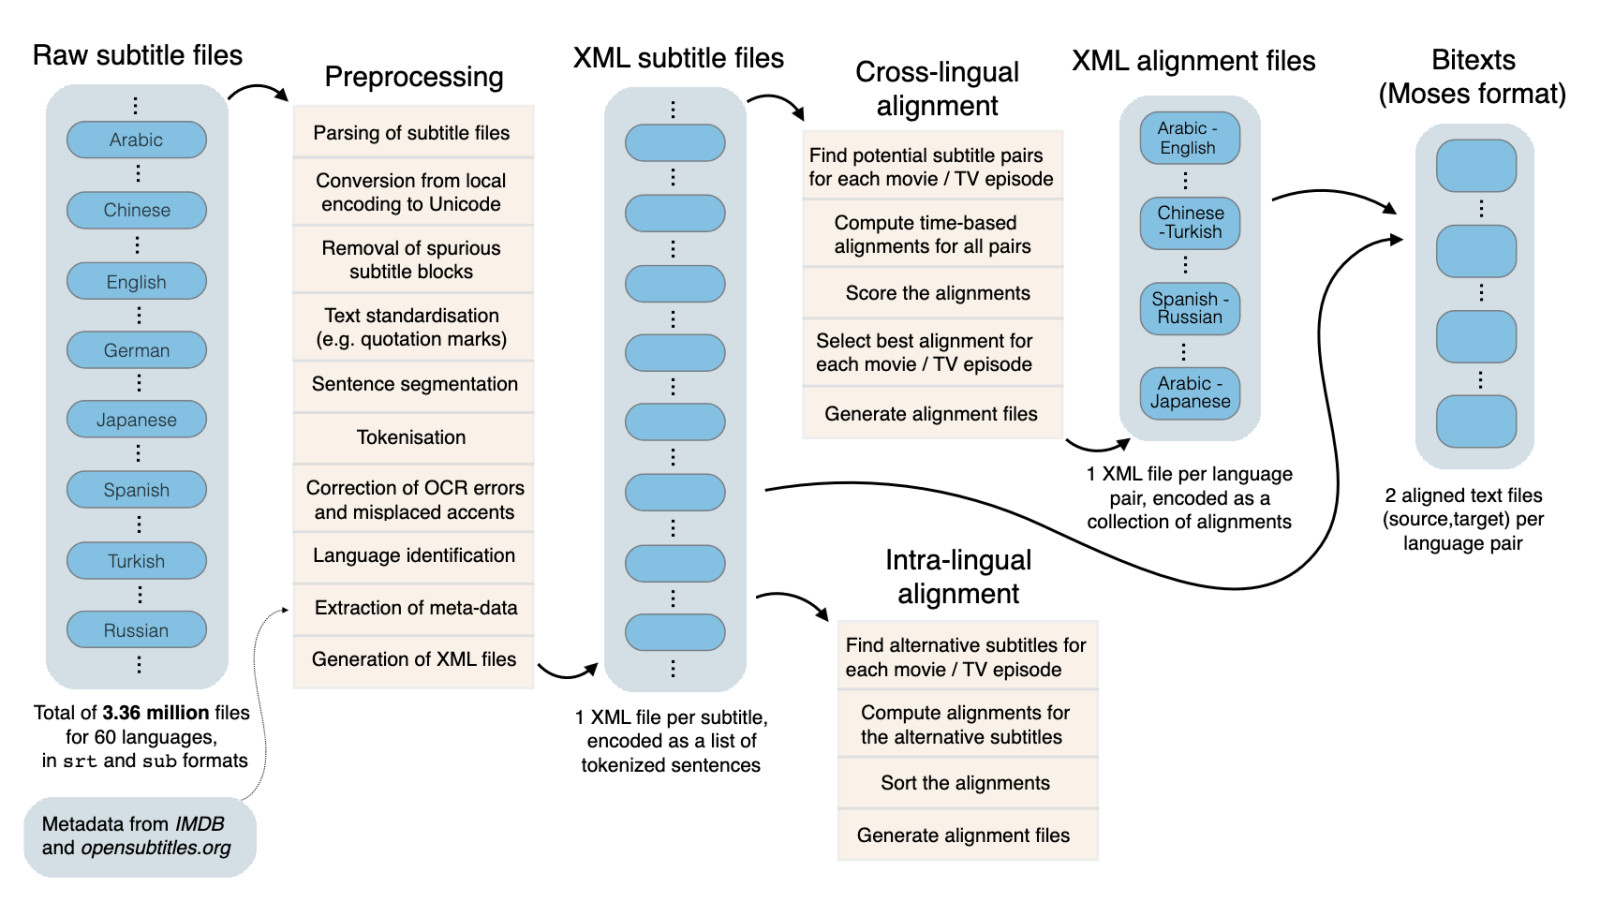 A flow diagram showing roughly "Raw subtitles files ➡ Preprocessing ➡ XML subtitle files ➡ Cross-lingual alignment ➡ XML alignment files ➡ Bitexts."